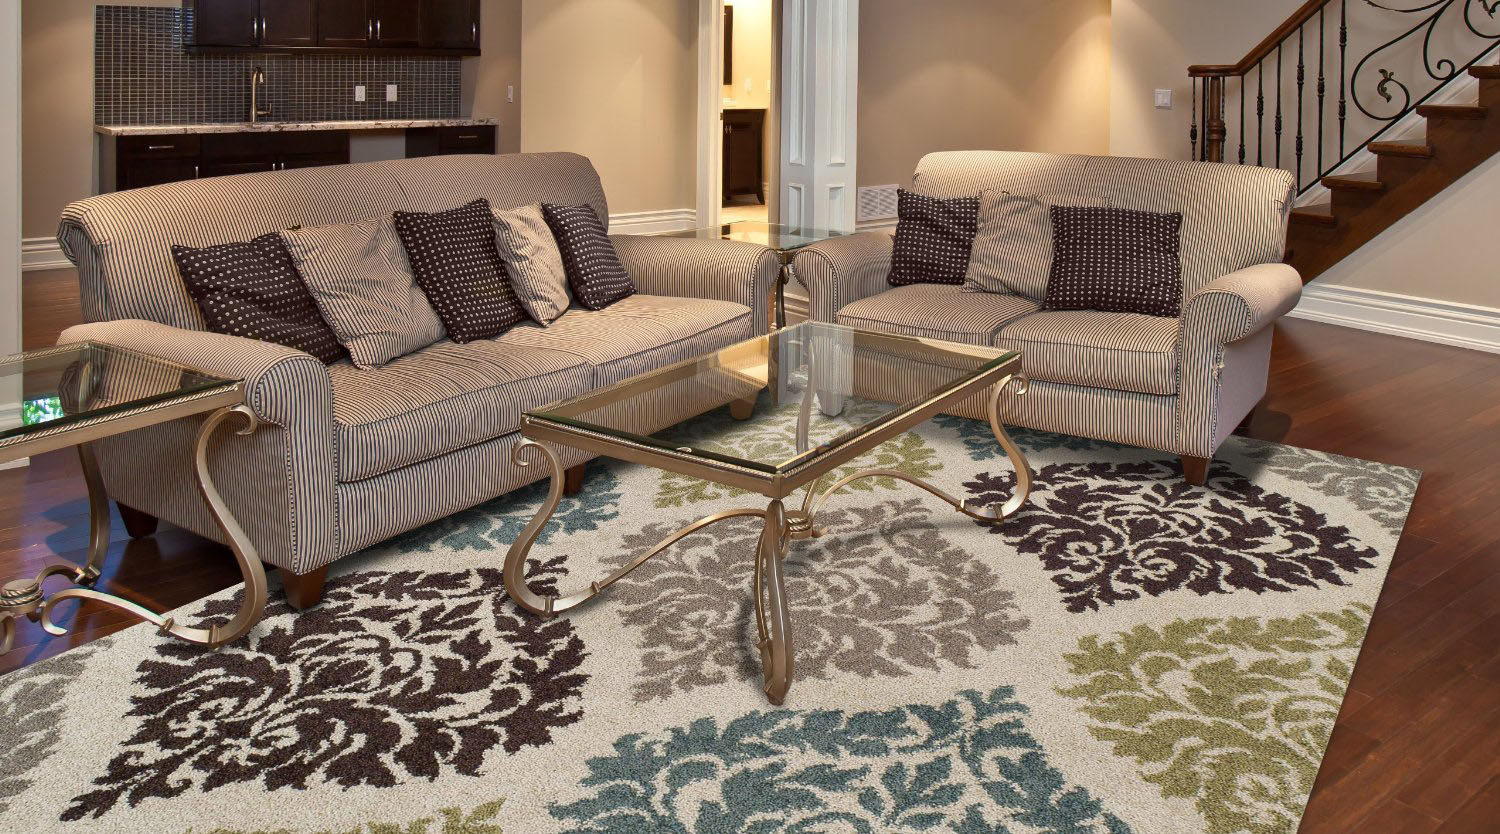 Living Room Area Rugs 8X10
 Create Cozy Room Ambience With Area Rugs